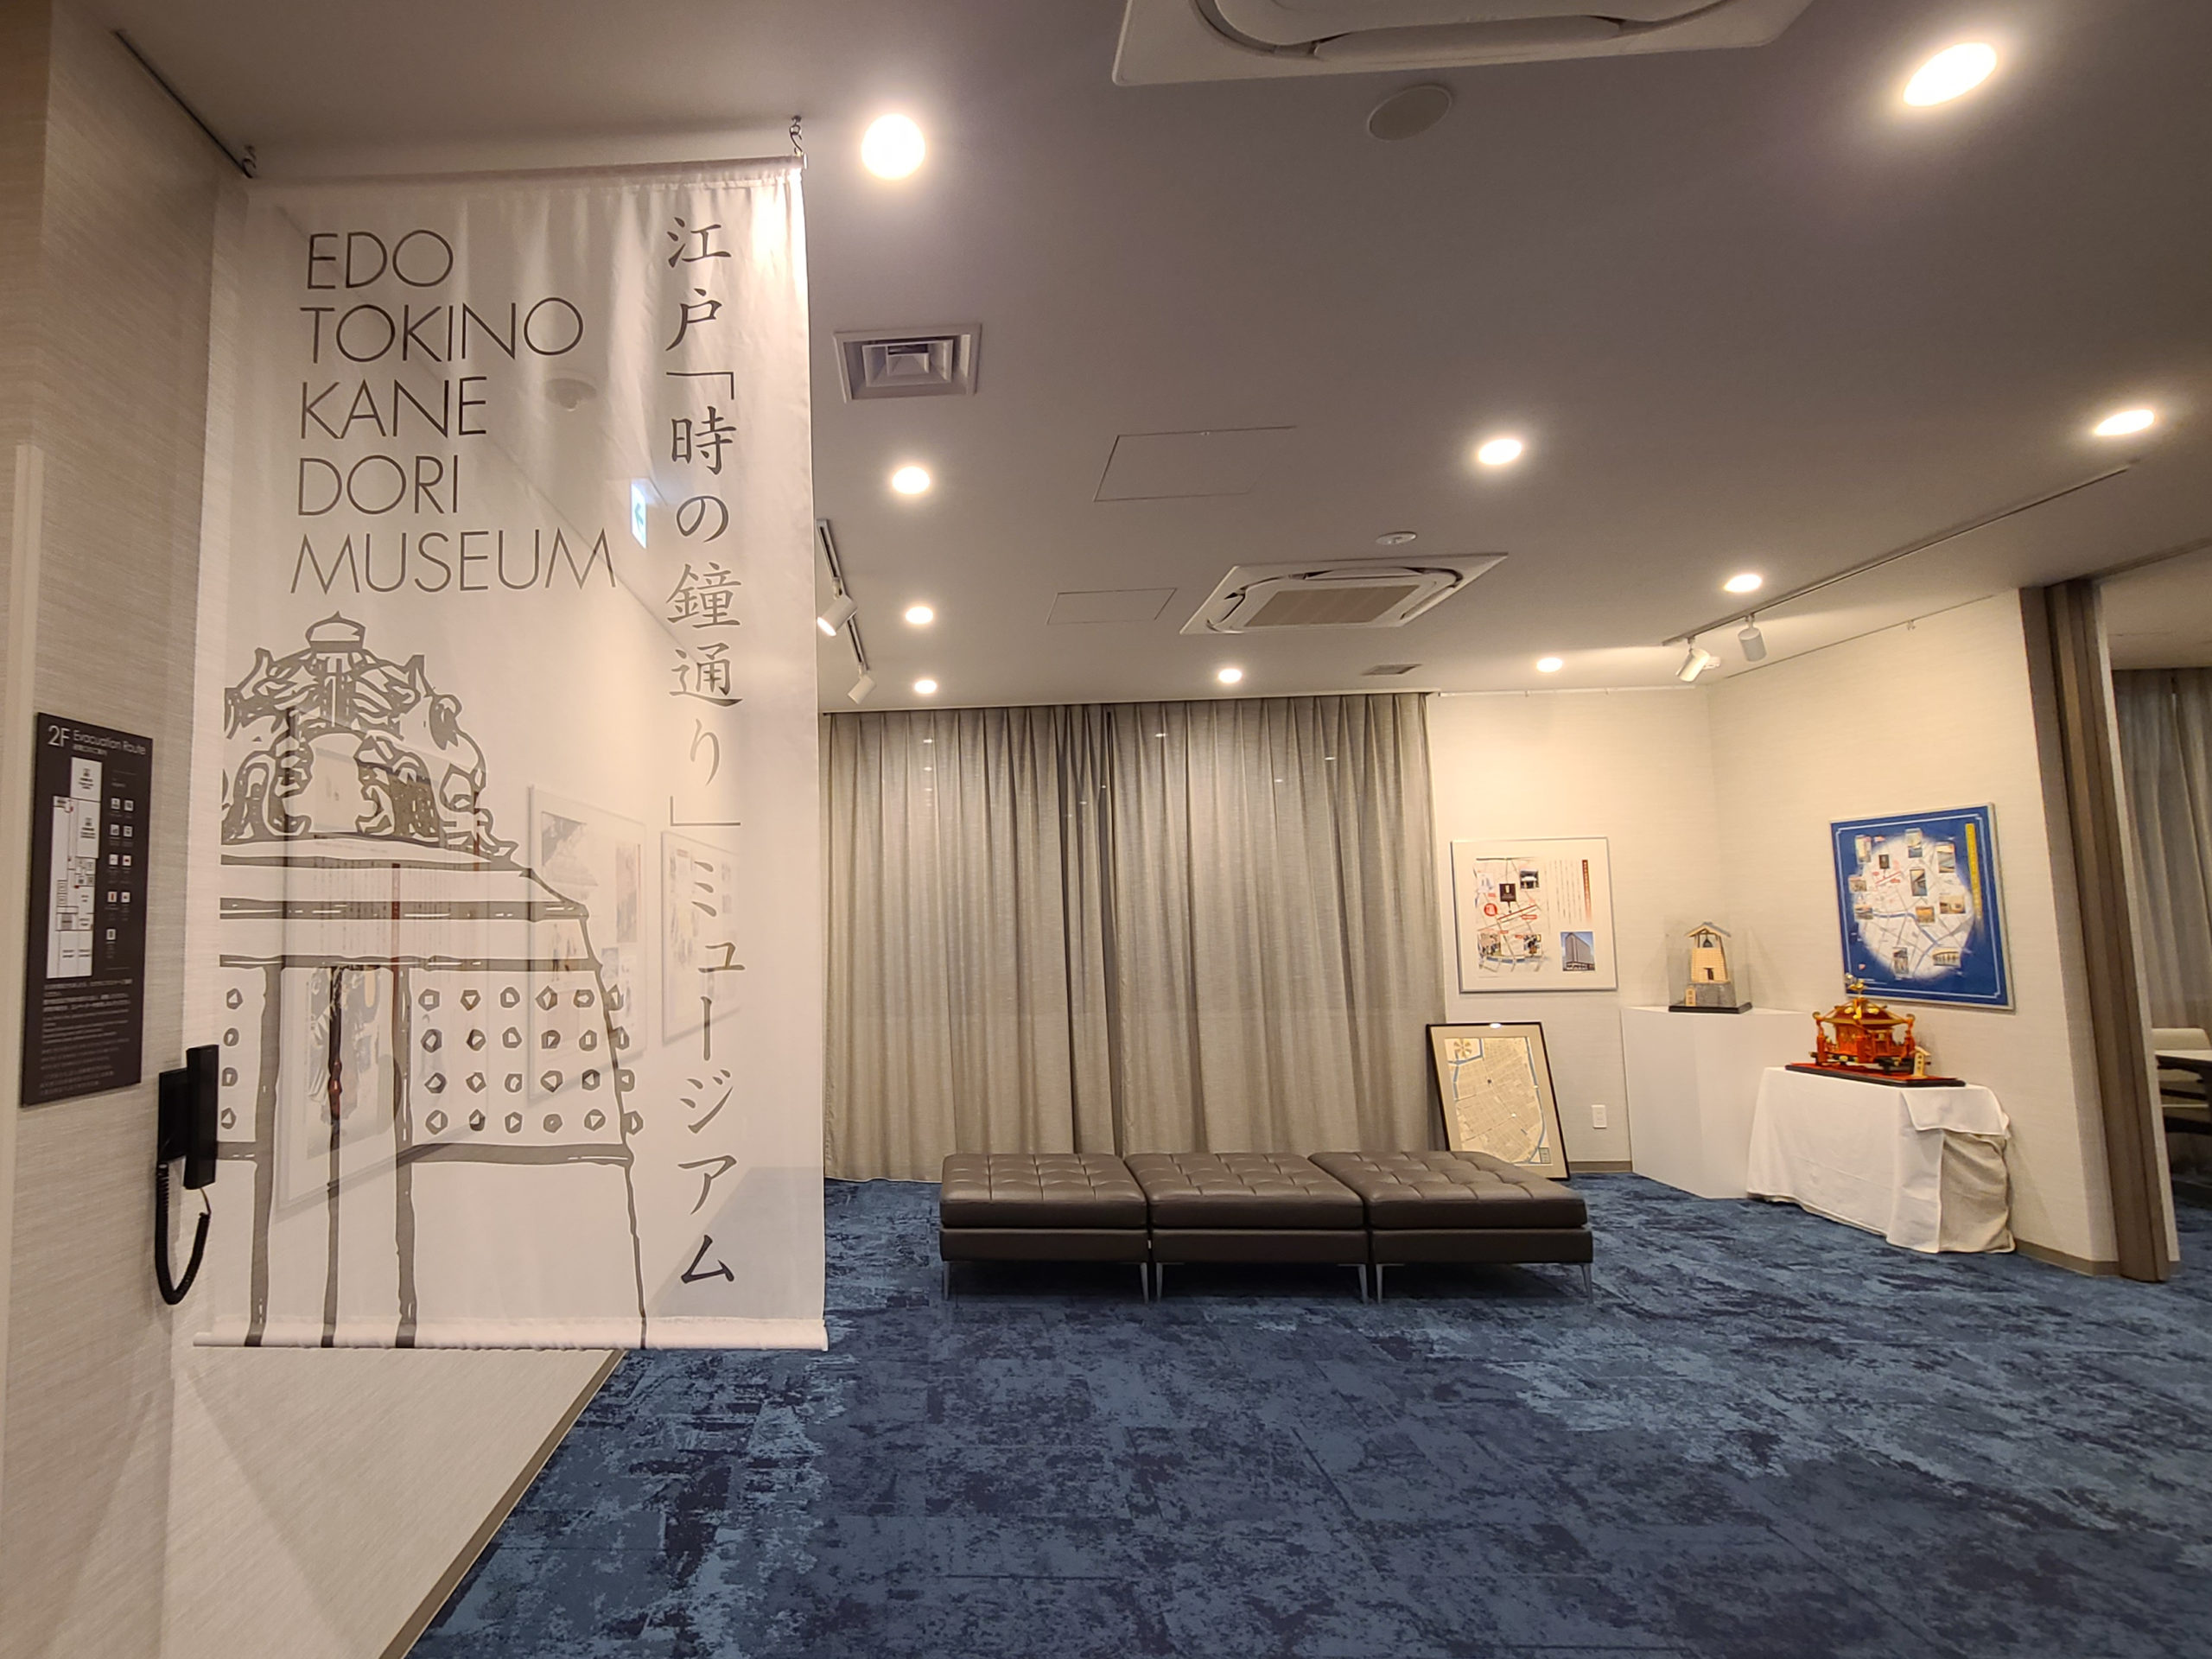 The Edo Tokino Kane Dori Museum on the second floor—a space that displays historical maps and plaques talking about the history of the hotel